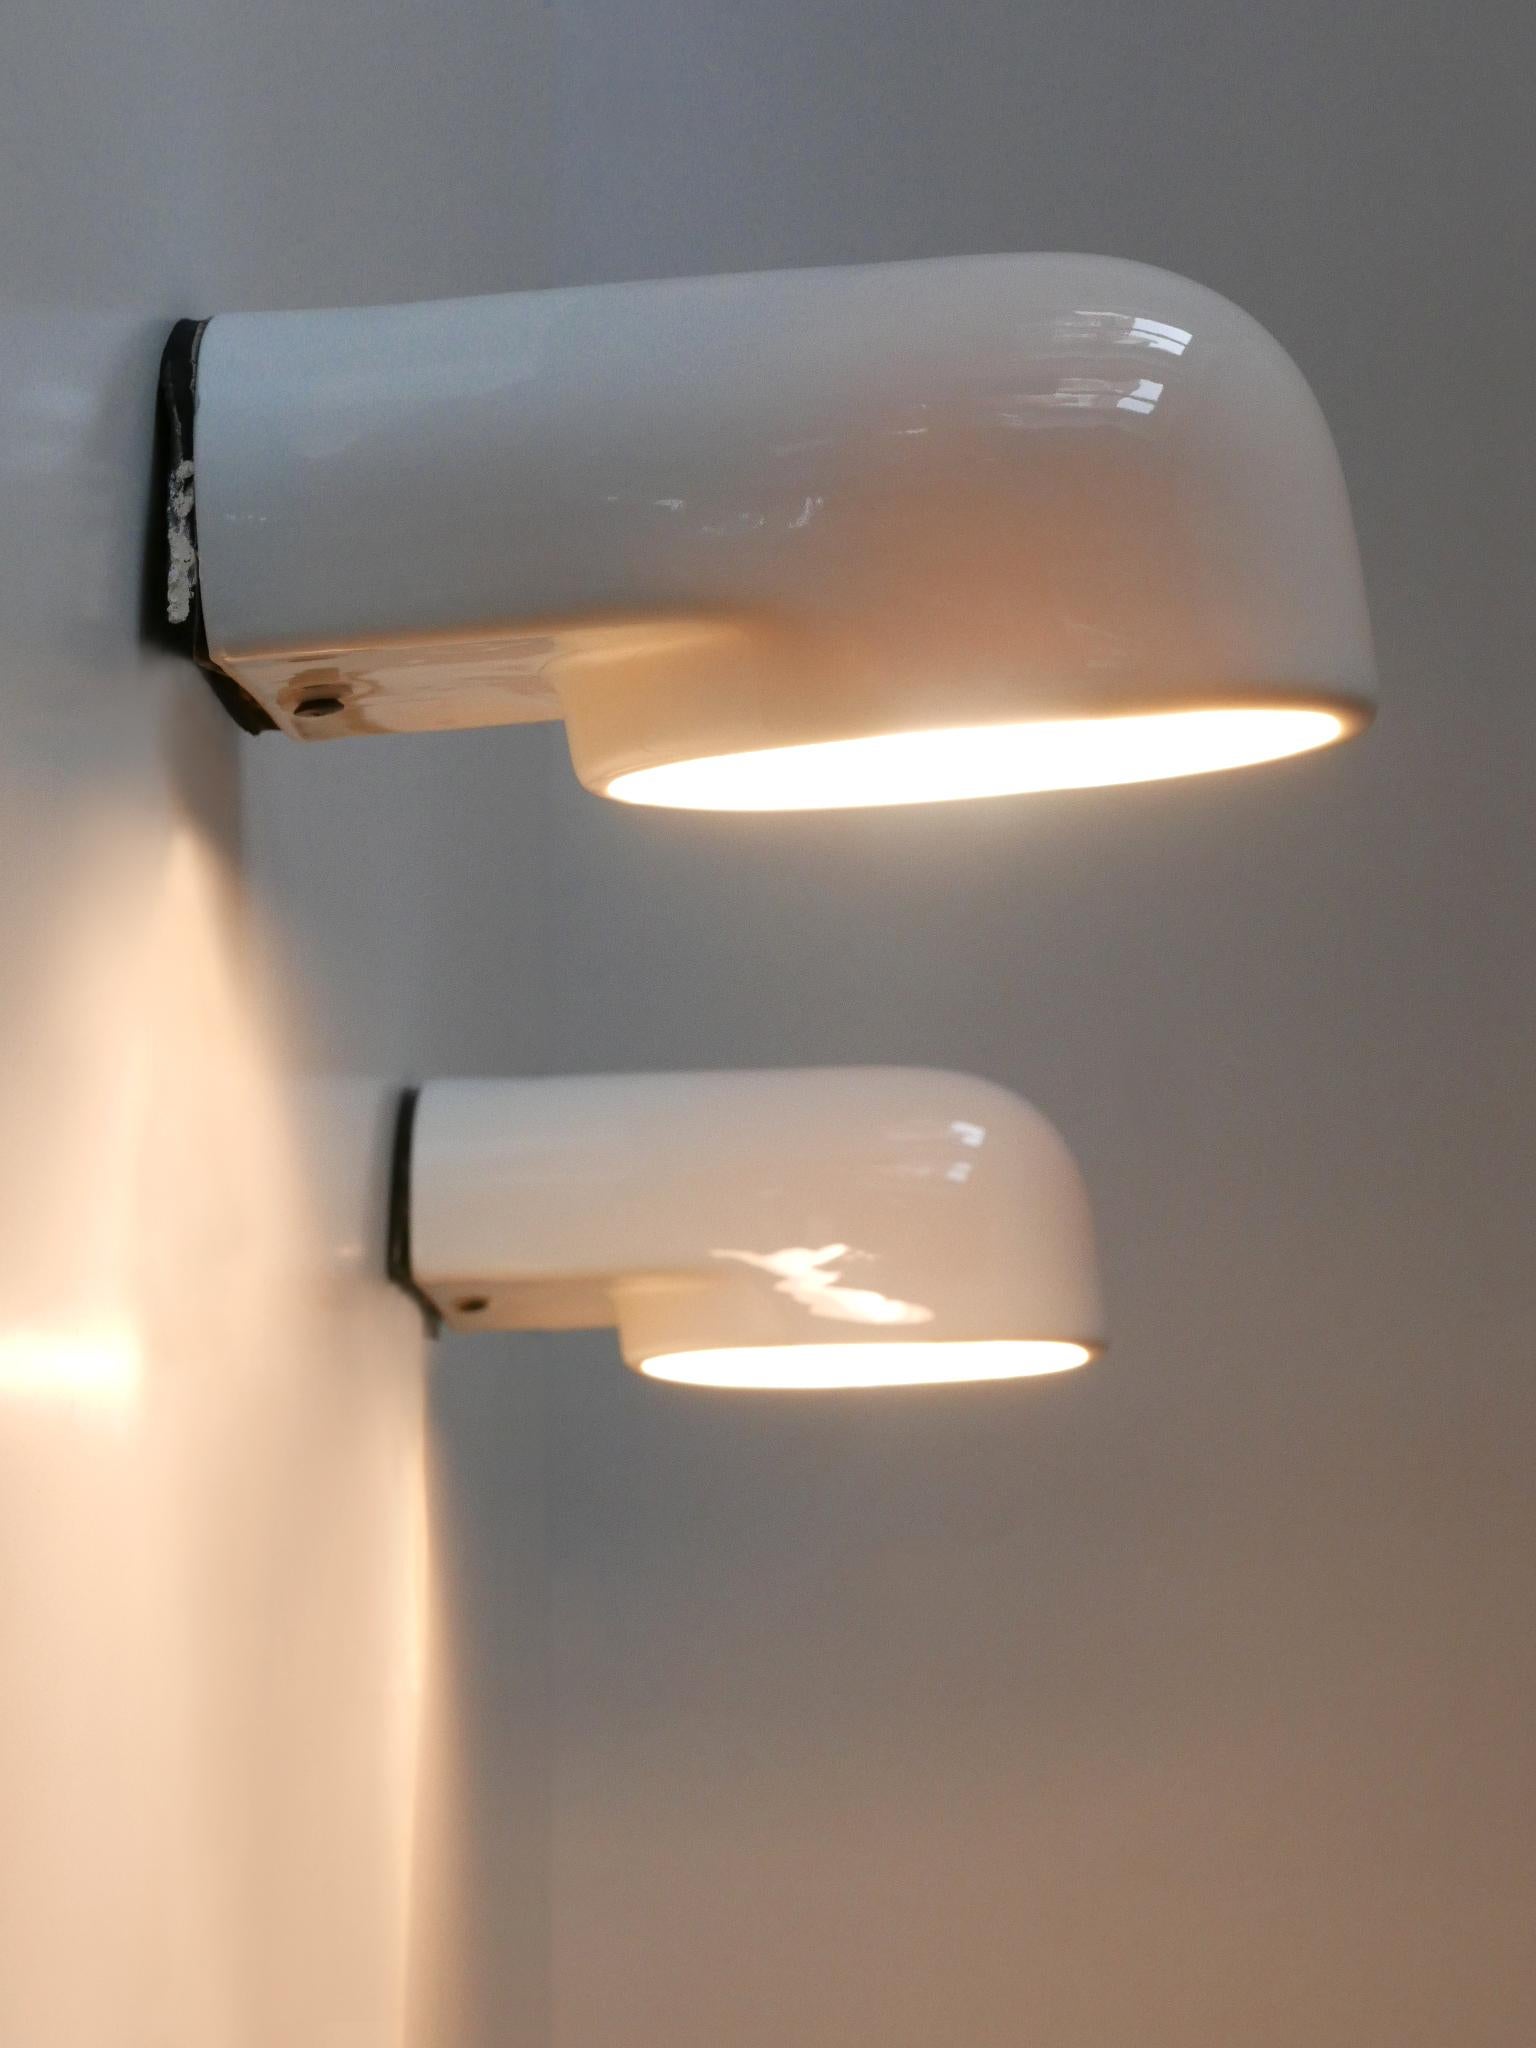 Set of two rare and elegant mid-century modern up & down lighter sconces. Model 'Pafo'. Manufactured by Artemide, Italy, 1970s.

Executed in glazed white ceramic and metal, each lamp needs 1 x E27 / E26 Edison screw fit bulb, is wired, in working